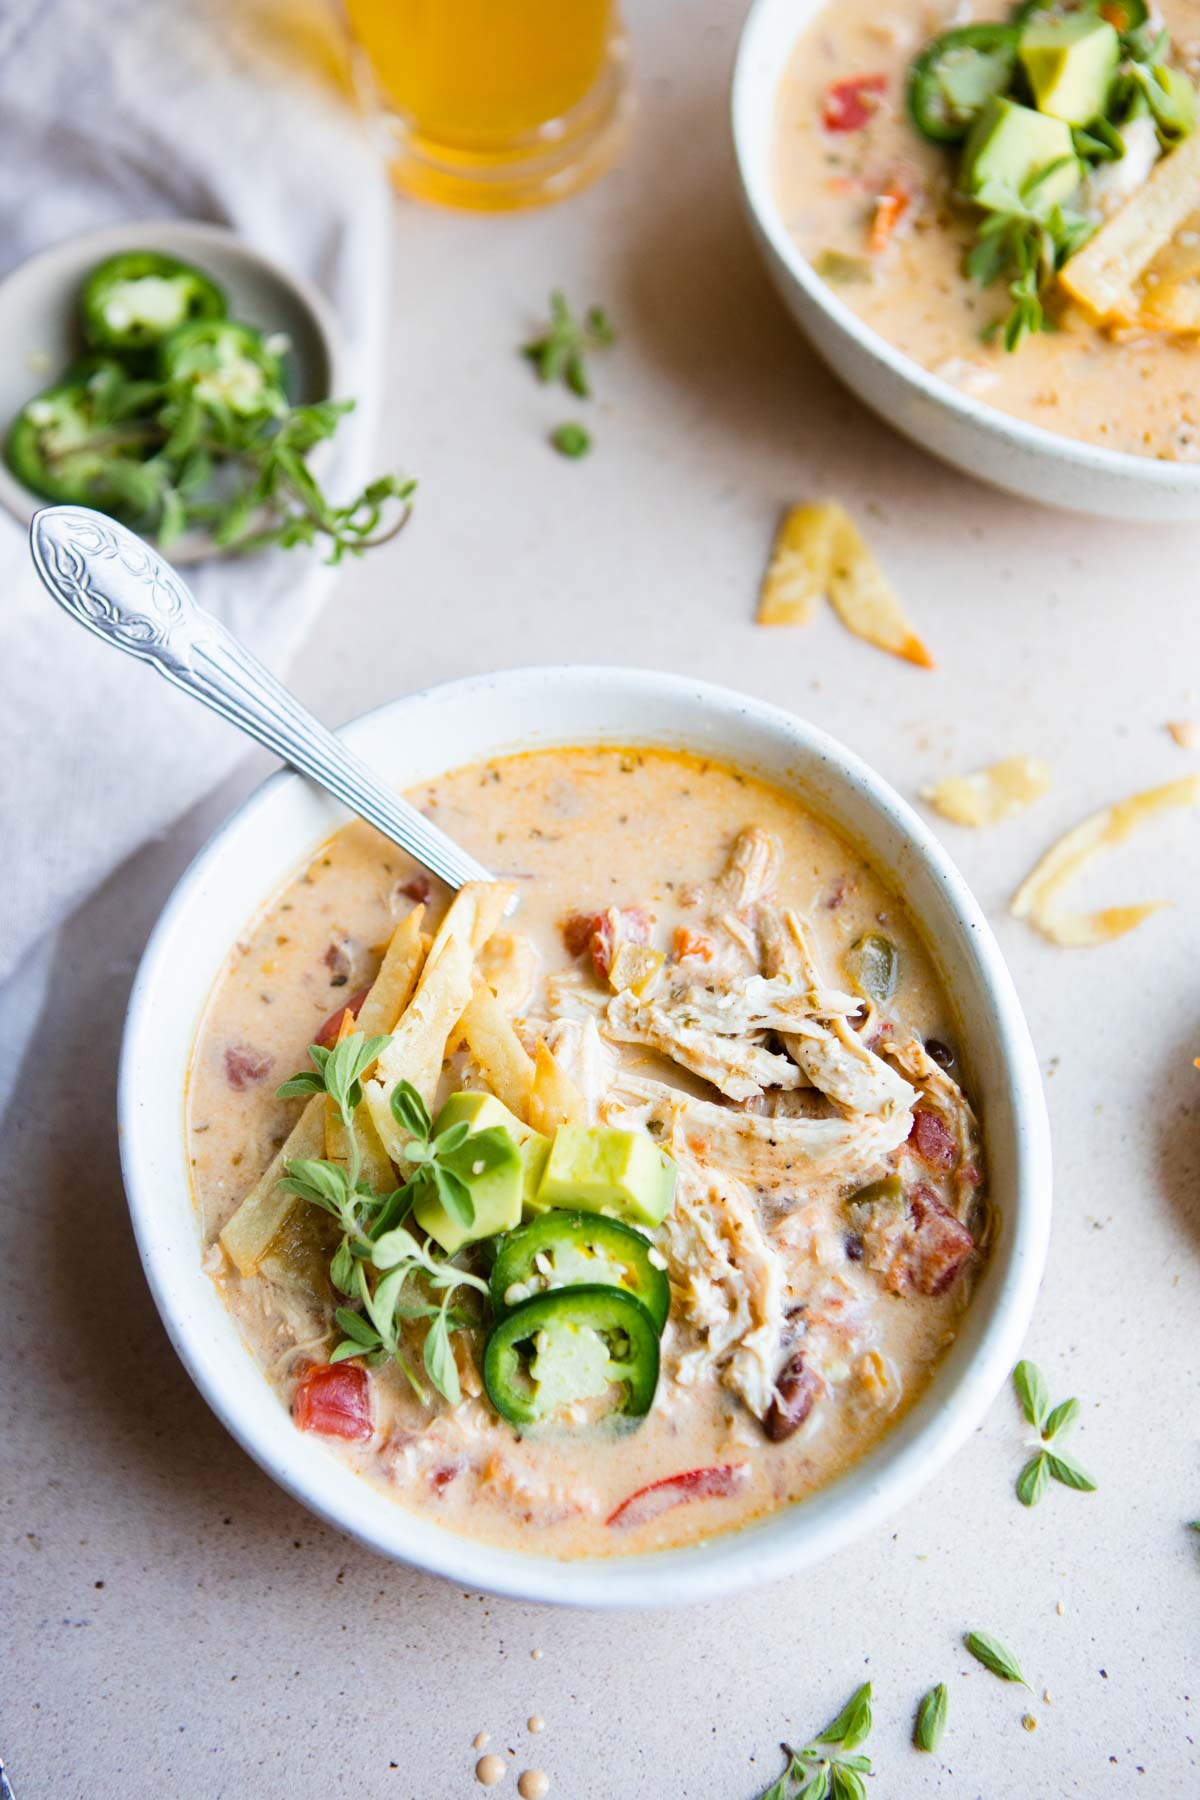 shredded chicken in a creamy soup garnished with jalapeno, fresh oregano and avocado 